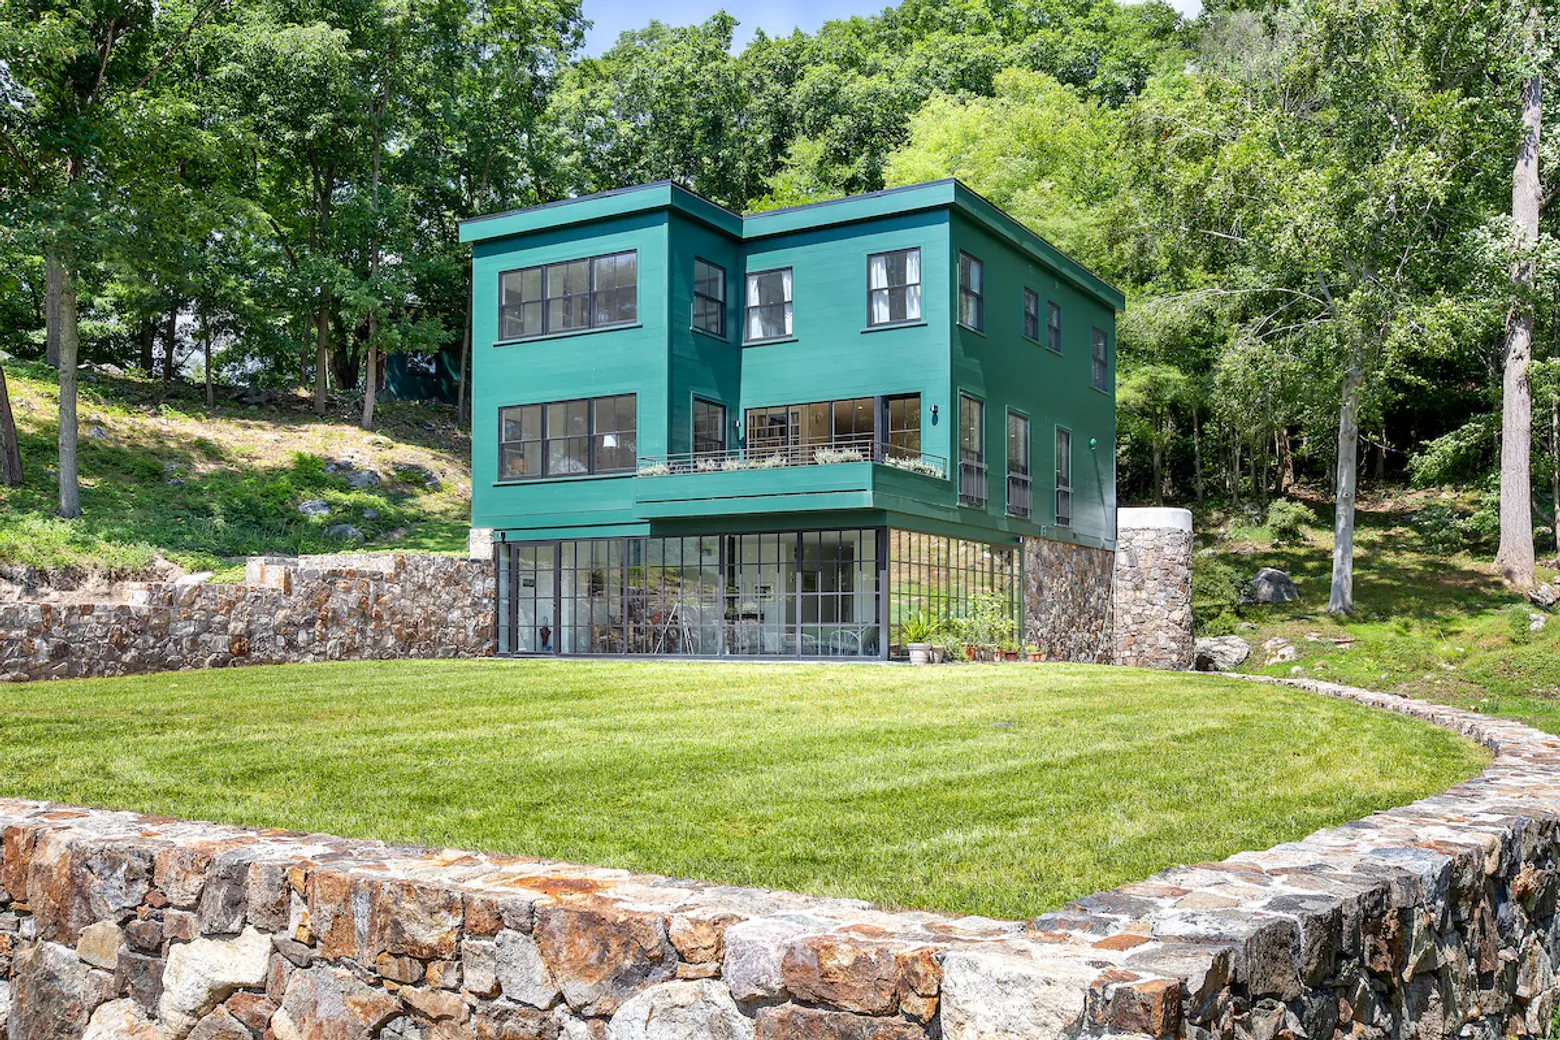 This $8M modern home on the Hudson comes with a Greek Temple playhouse